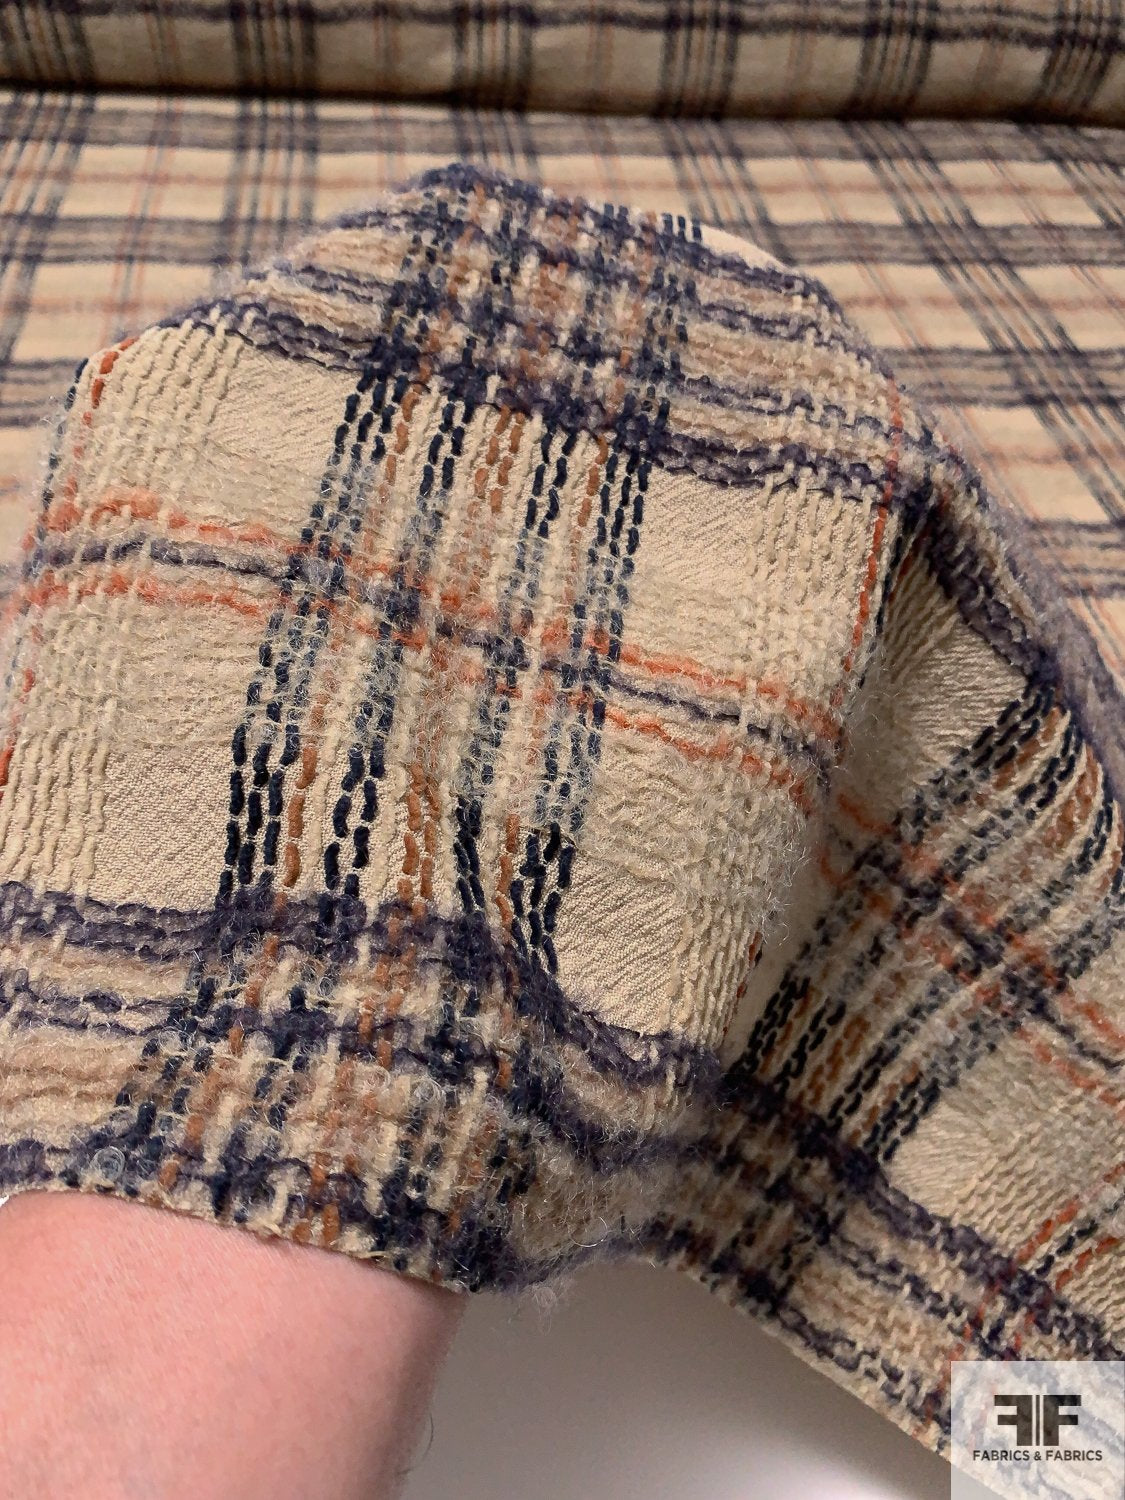 Italian Plaid Textured Jacket Weight Wool Suiting with Mohair Yarns - Light Khaki / Navy / Brown / Saddle